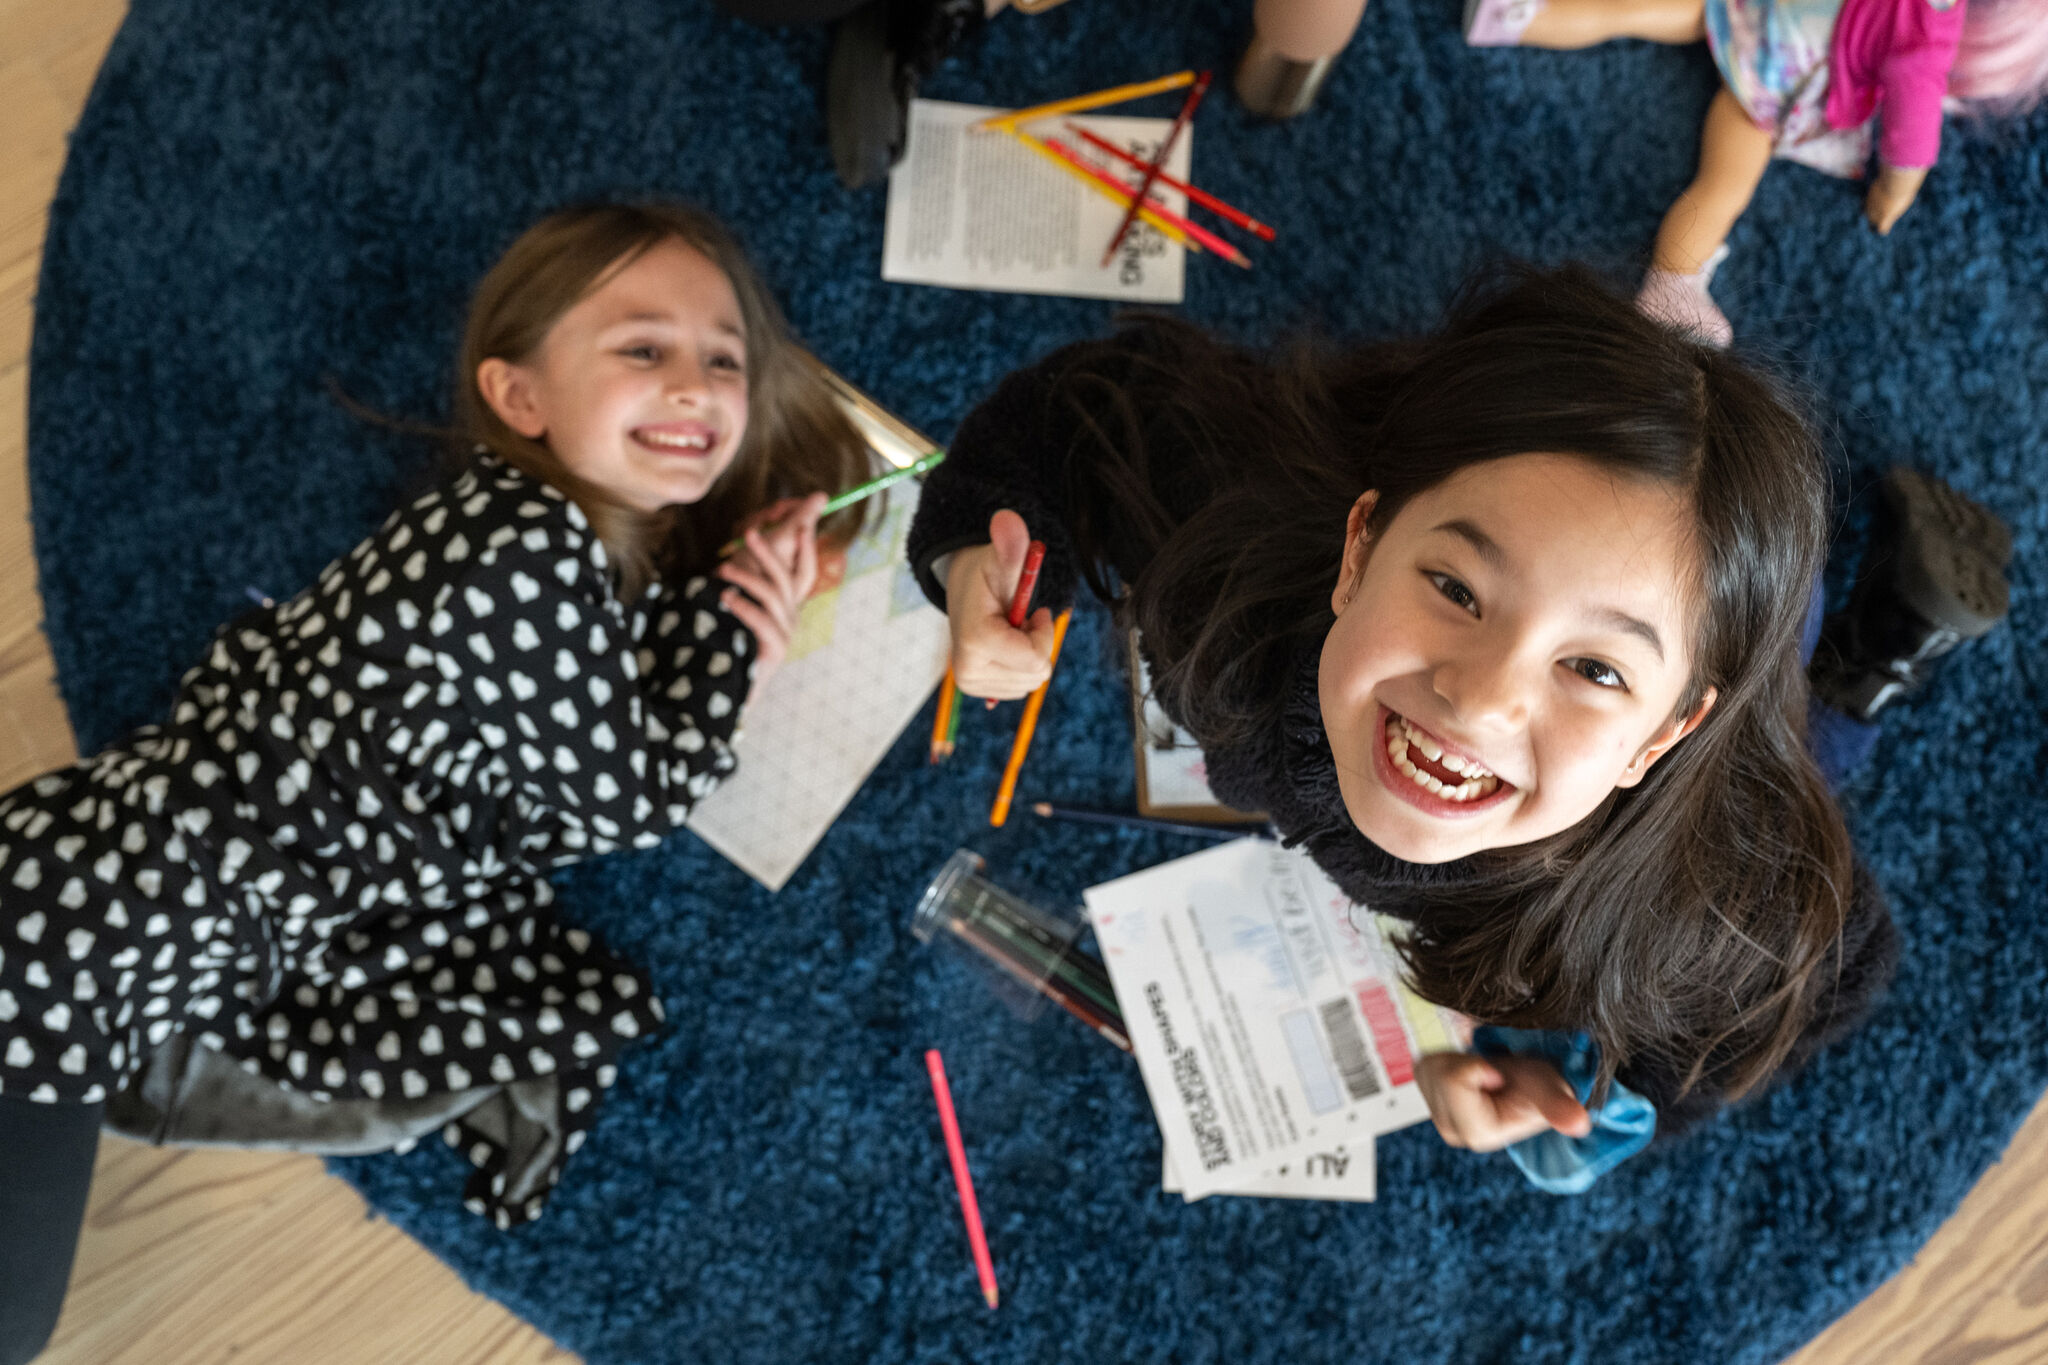 Two girls lying on a blue rug, smiling at the camera with coloring supplies scattered around them.